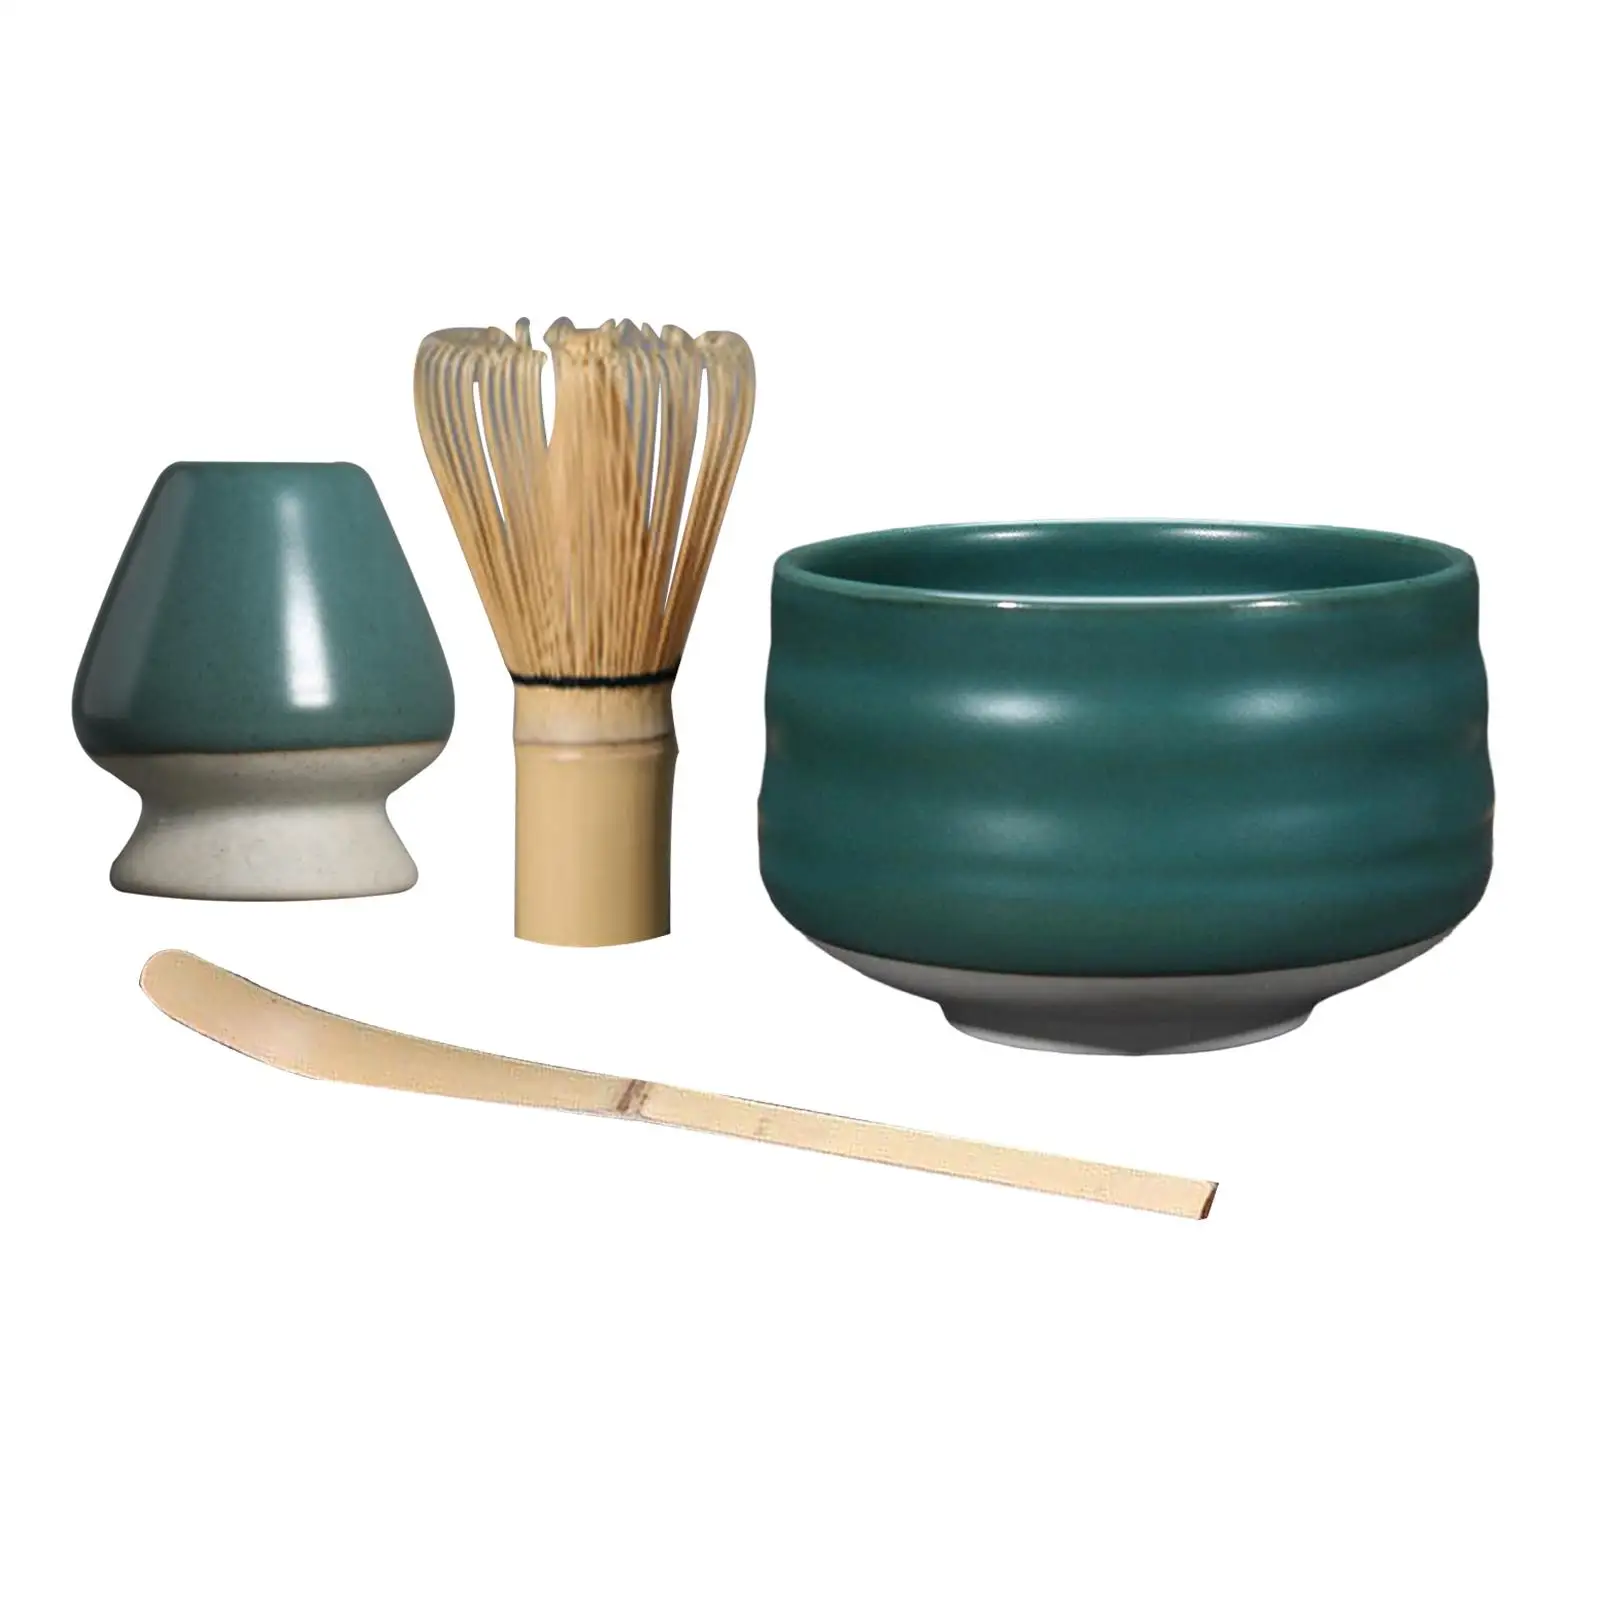 Japanese Ceremonial Tea Bowl Full Set Matcha Whisk Set with Accessories and Tools Bamboo Chasen Matcha Whisk Scoop and Holder